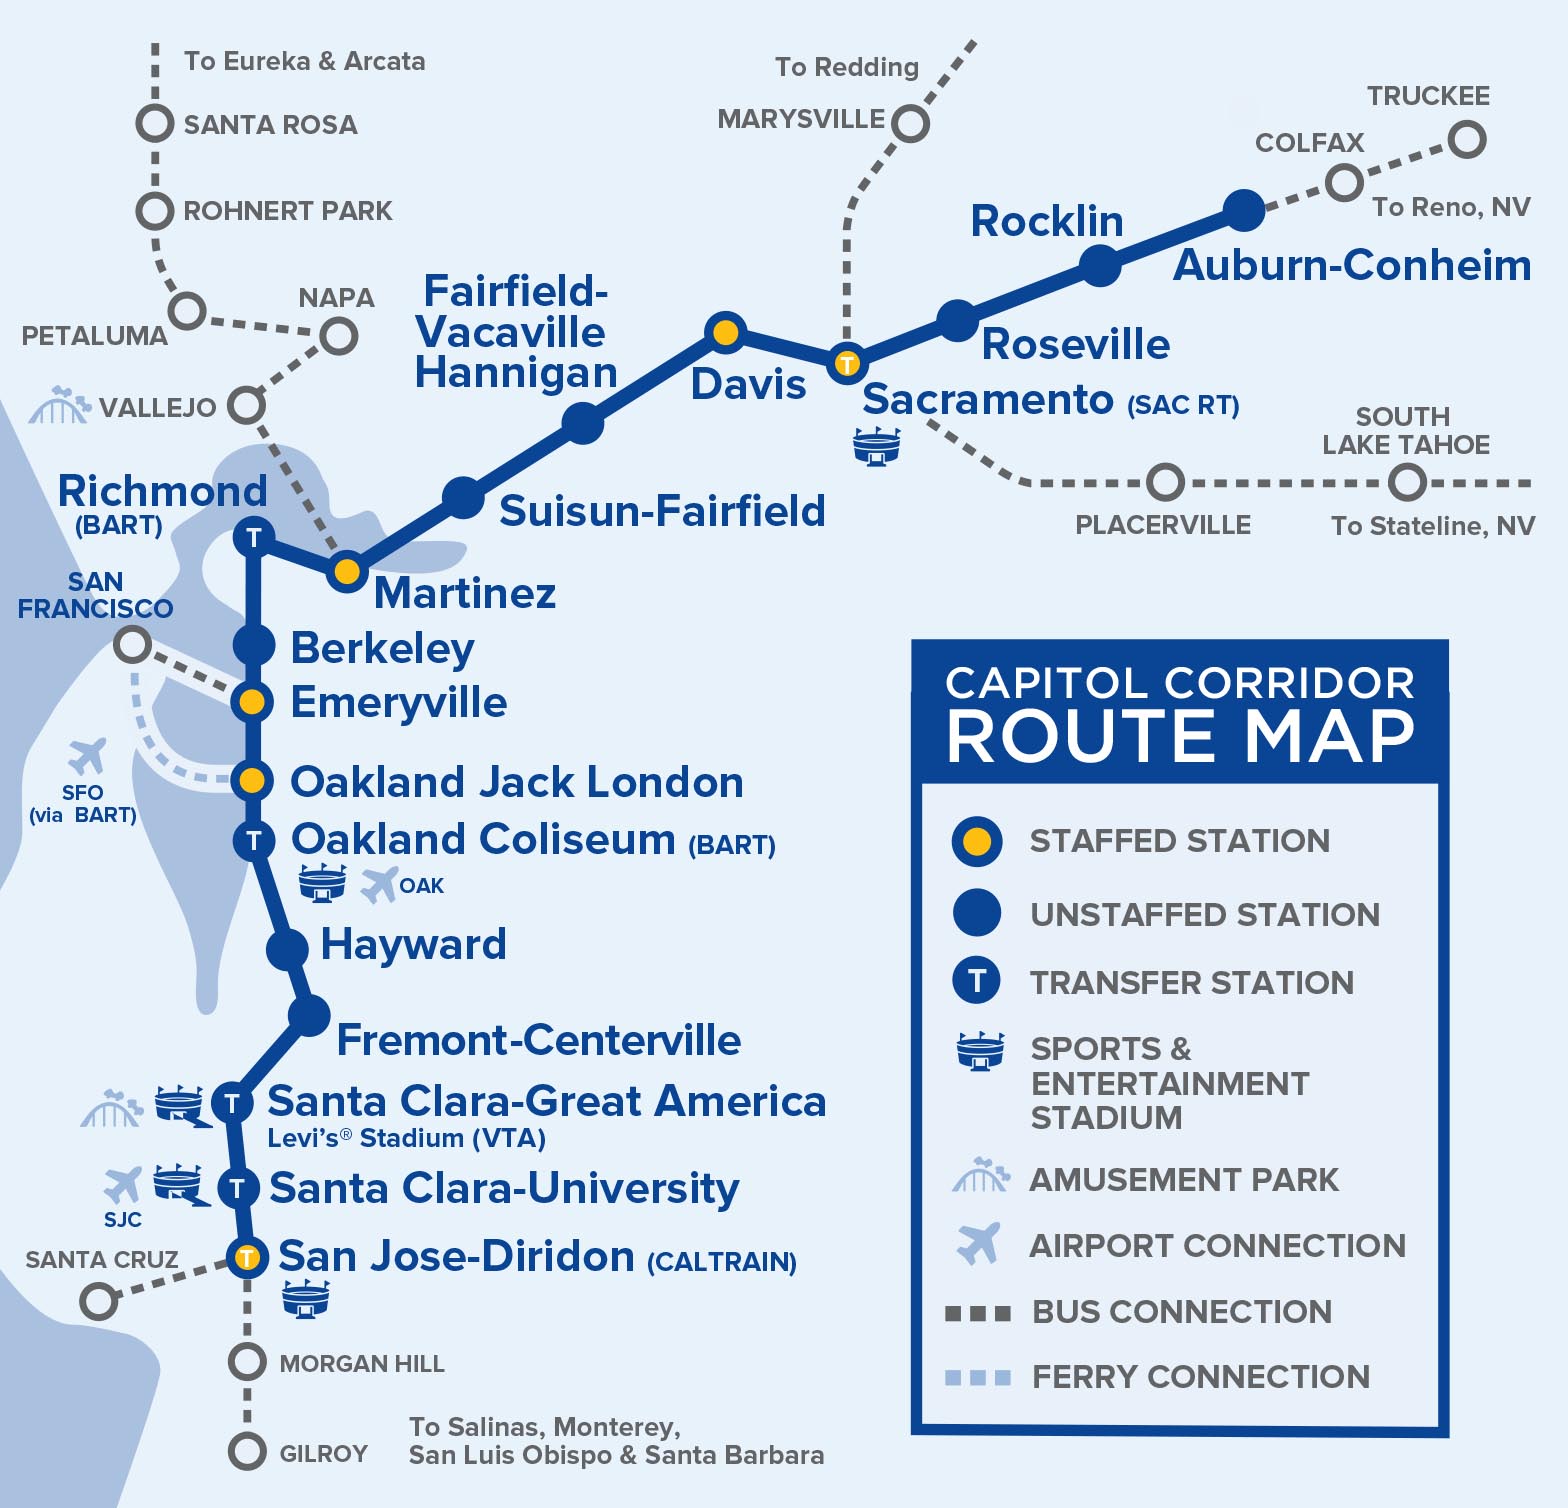 A map of the Capitol Corridor service. The bridge is between Martinez and Suisun-Fairfield stations. But it presents a choke point for the entire system.